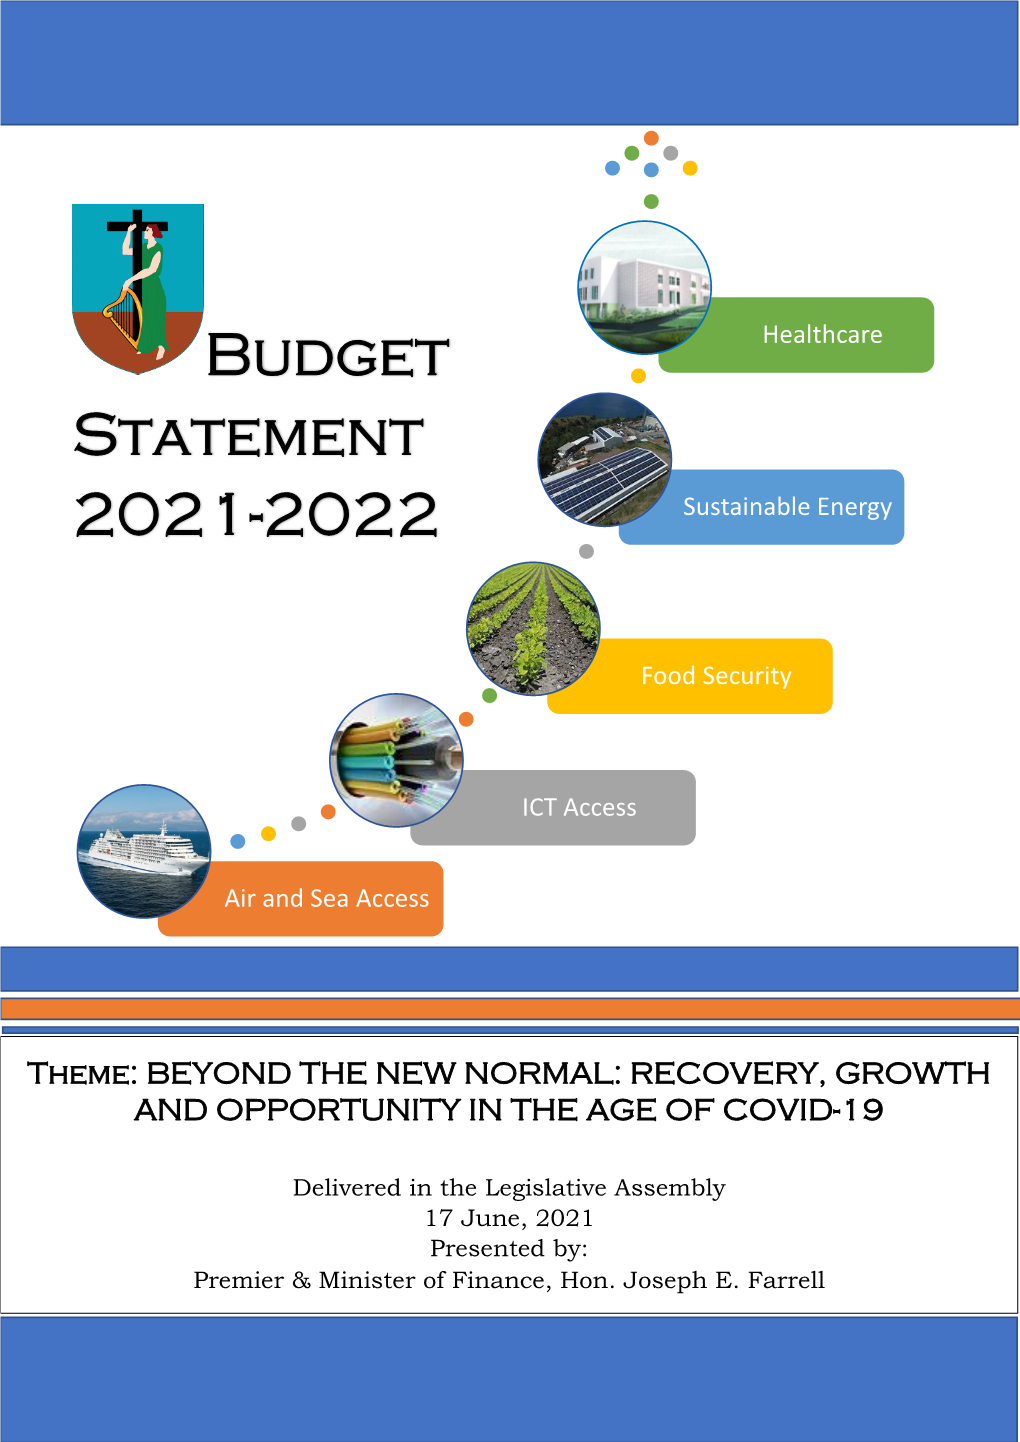 Budget 2021: Beyond the New Normal: Recovery, Growth and Opportunity in the Age of Covid-19 June 2021